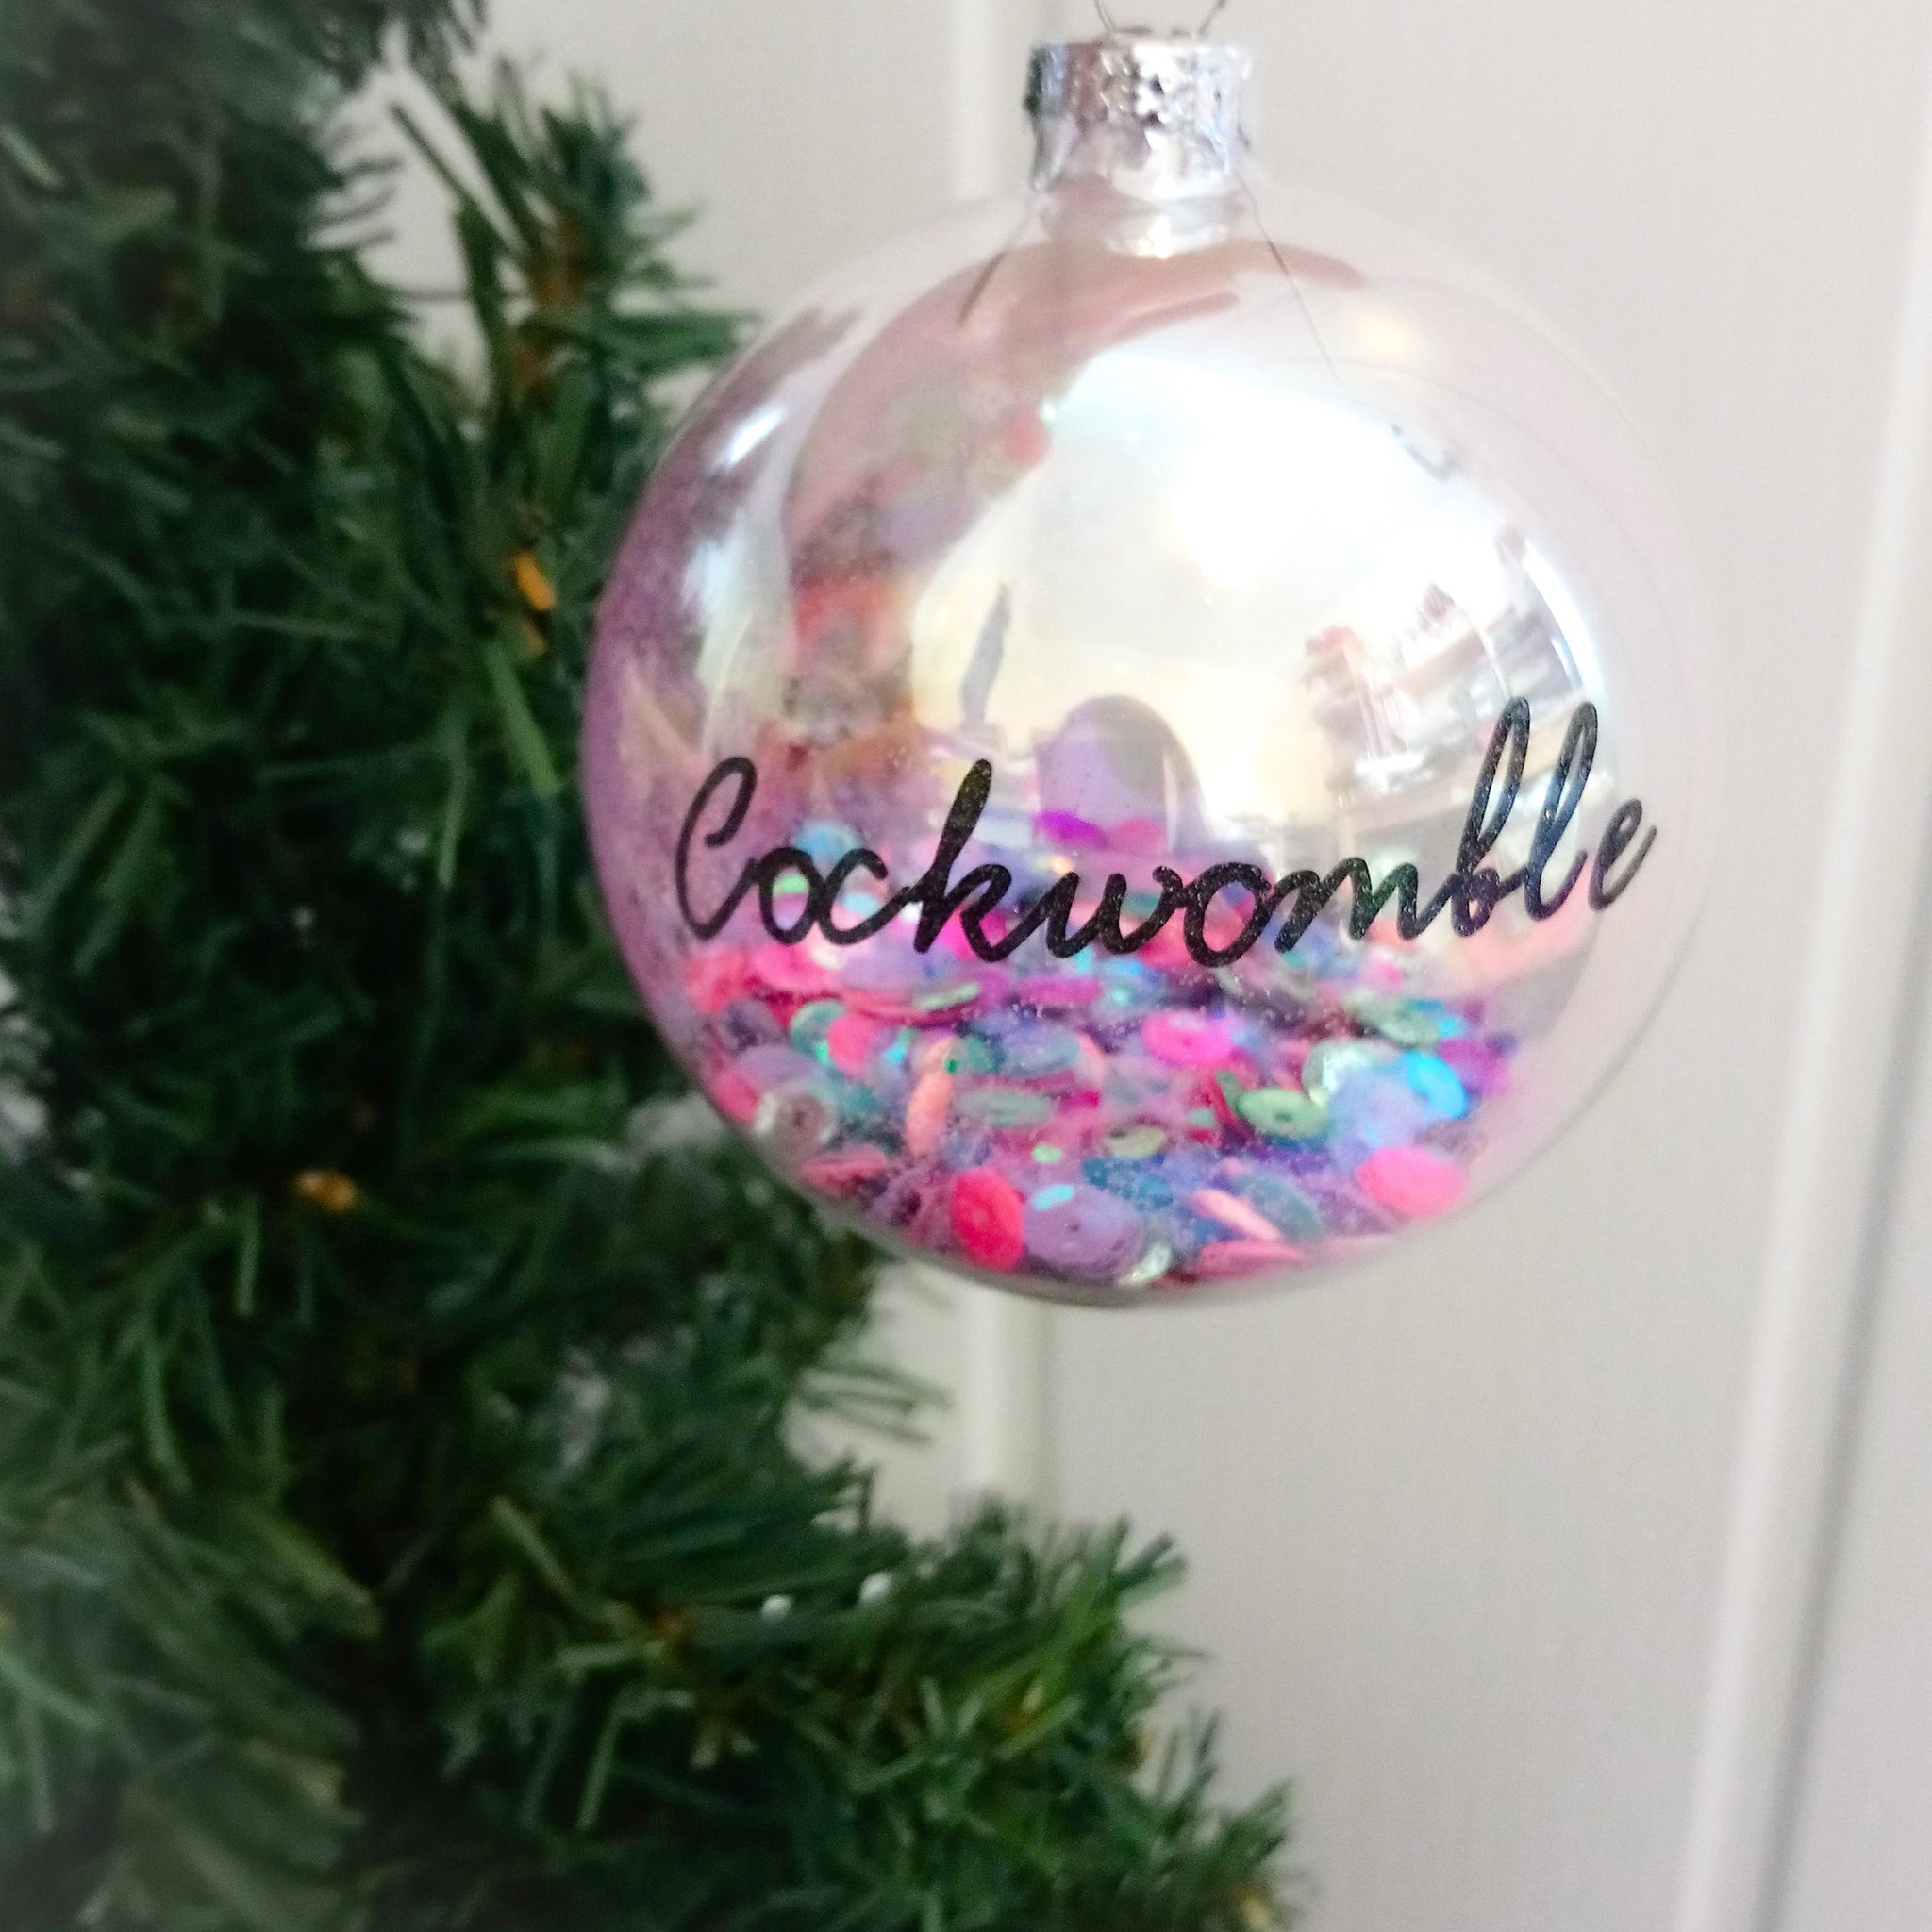 Cockwomble 8cm filled iridescent glass Christmas bauble